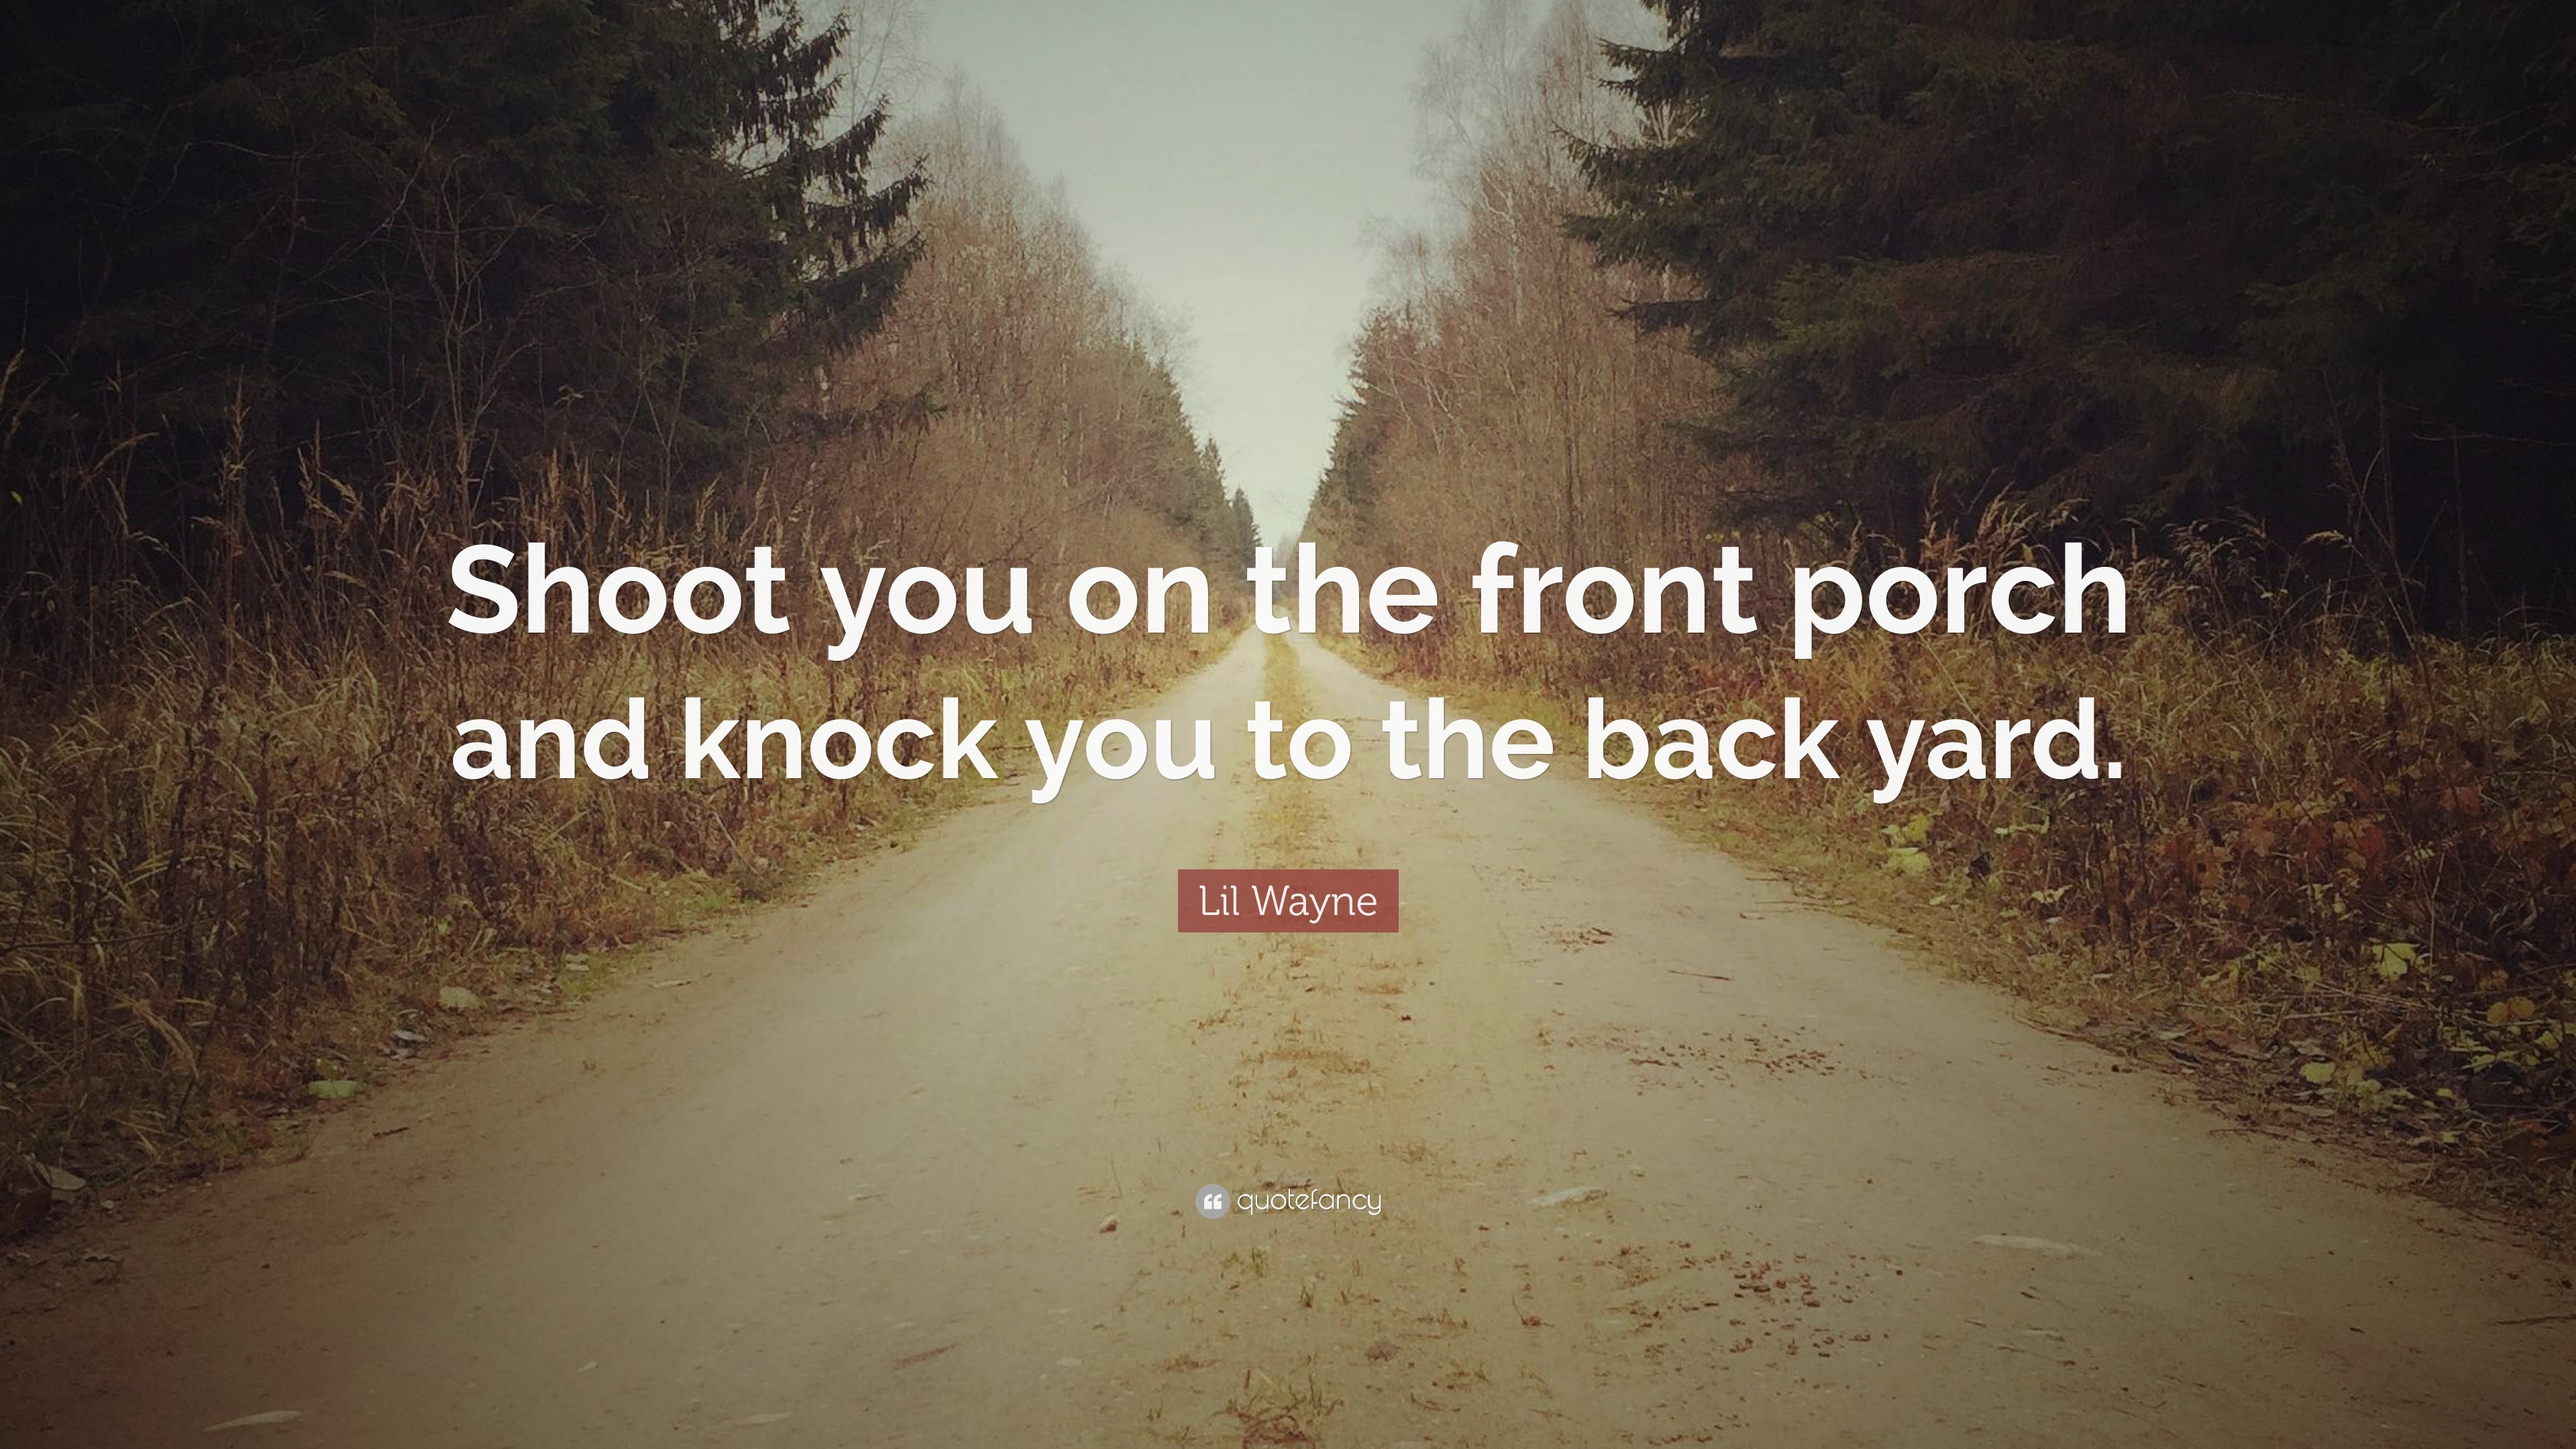 Lil Wayne Quote: “Shoot you on the front porch and knock you to the ...